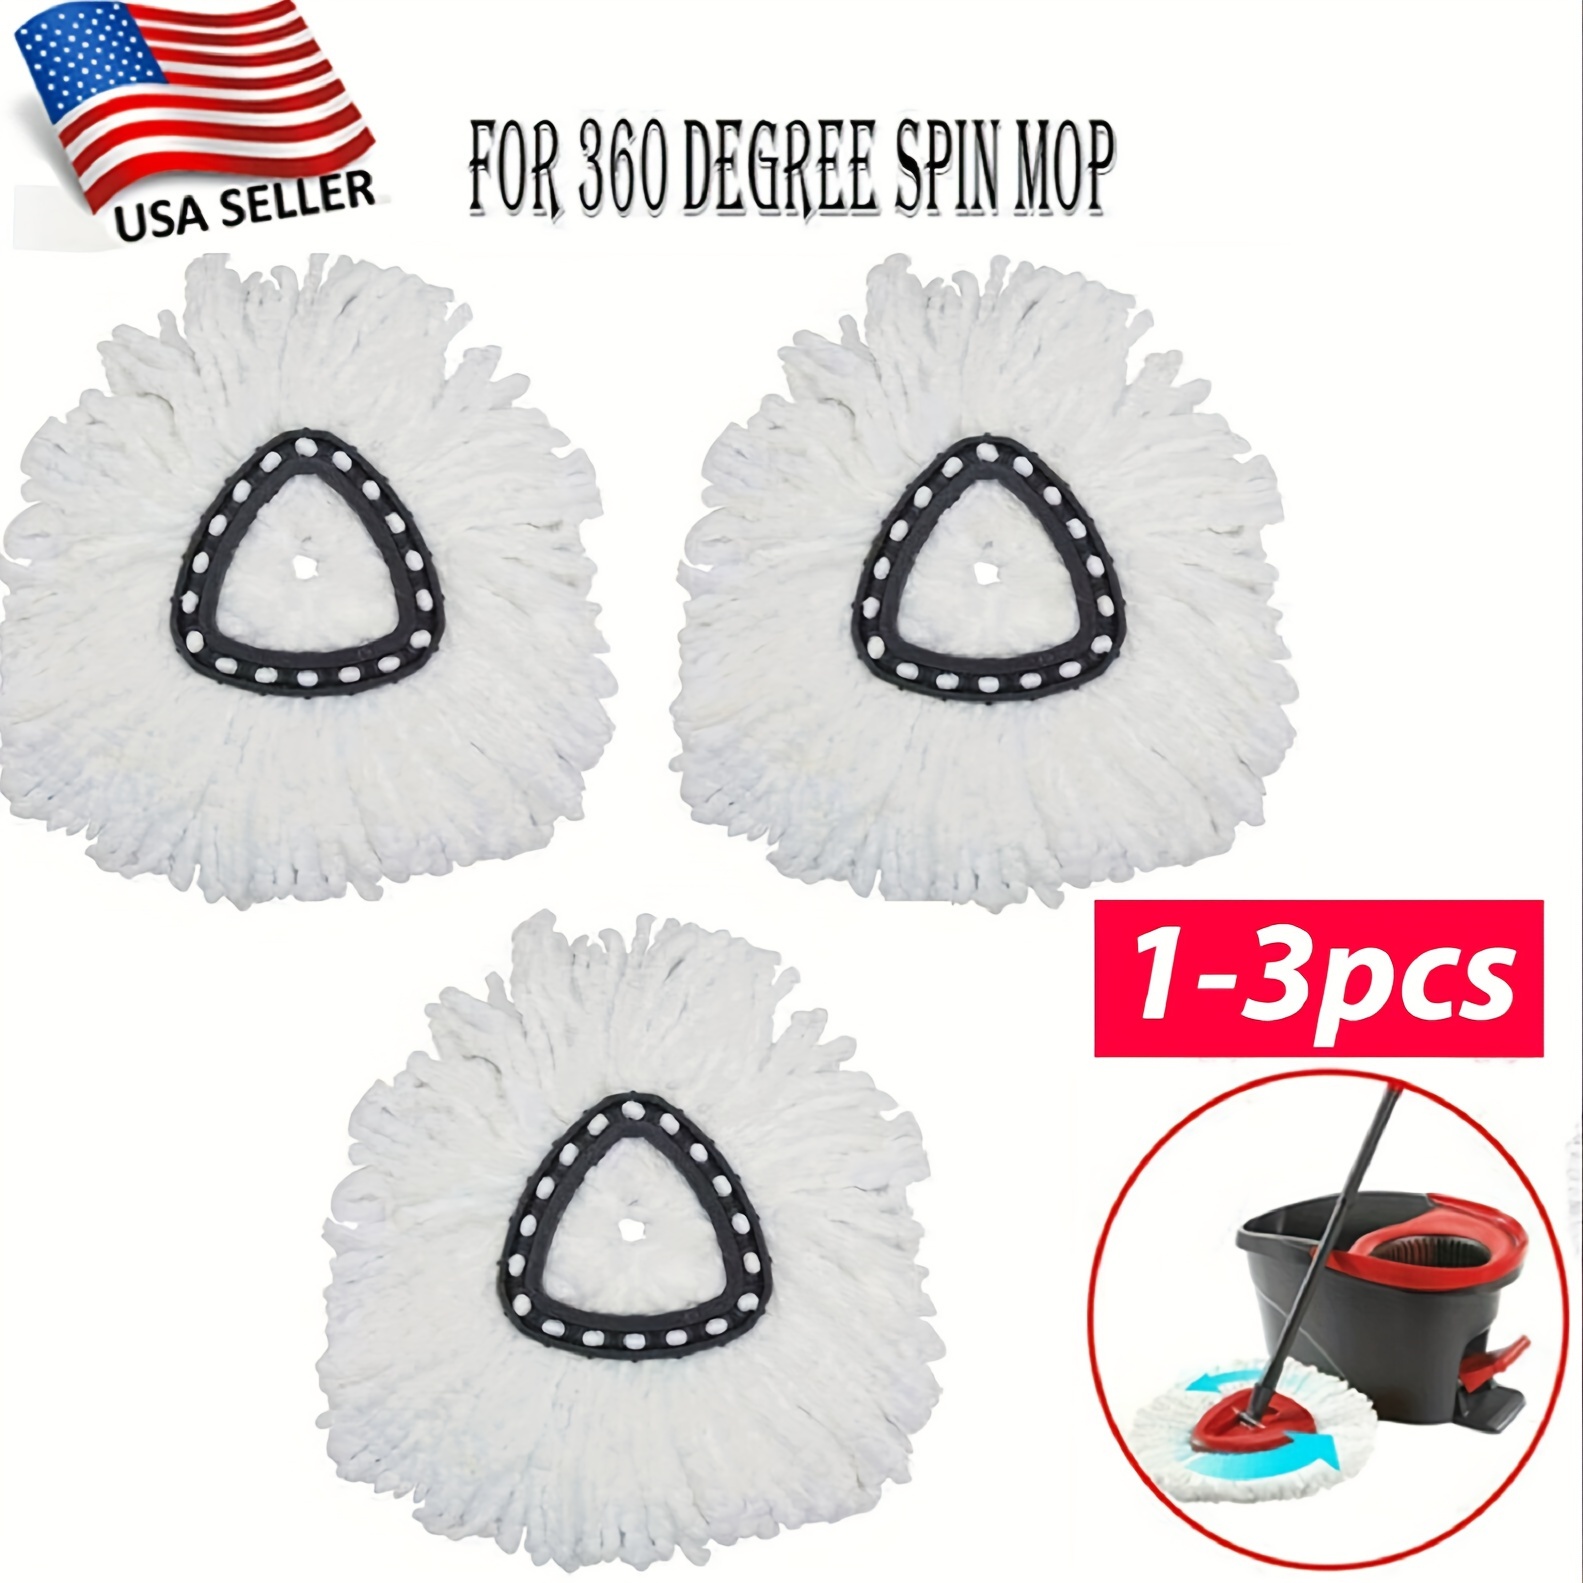 

1/2/3pcs, Spin Mop Head, Replacement Mop Head For Spin Mop, Washable Durable Mop Head Refill, Wet And Dry Cleaning, Dust Removal Mop Head, Easy To Clean, Cleaning Supplies, Cleaning Accessories